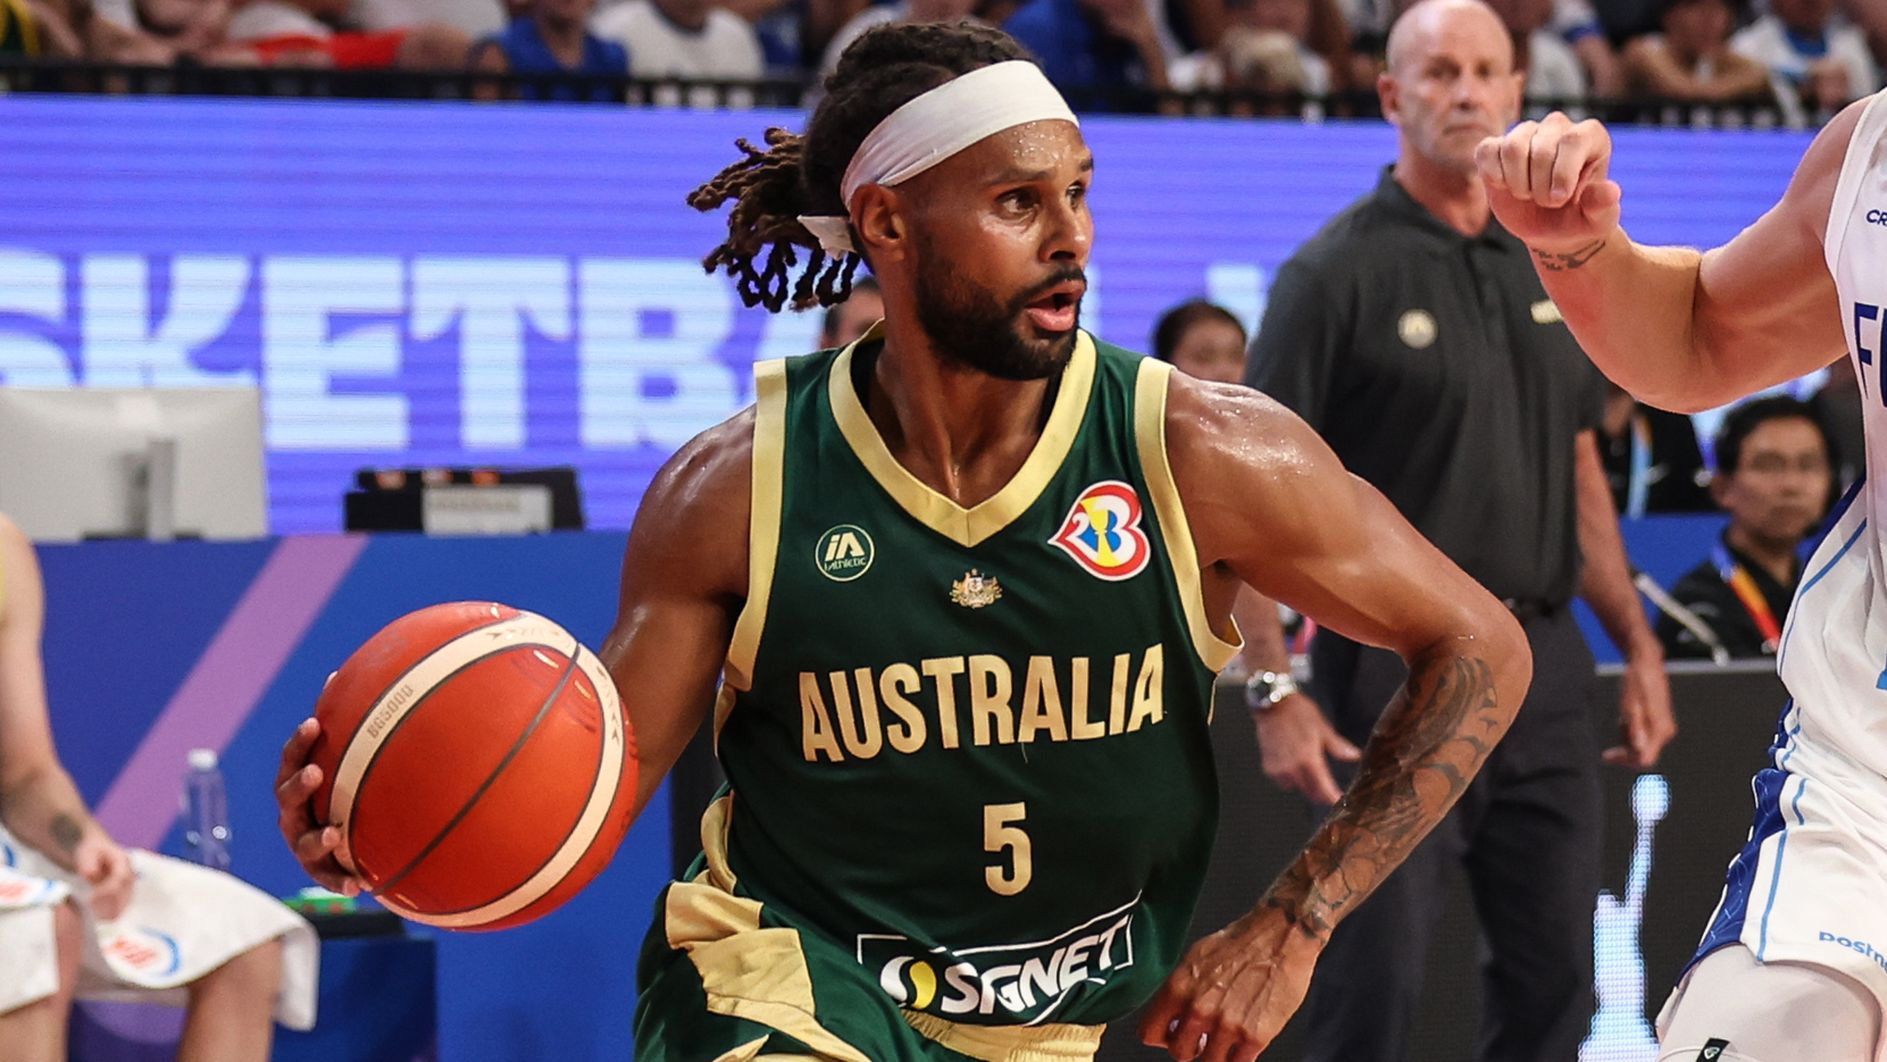 Patty Mills drives to the basket against Alex Murphy of Finland.